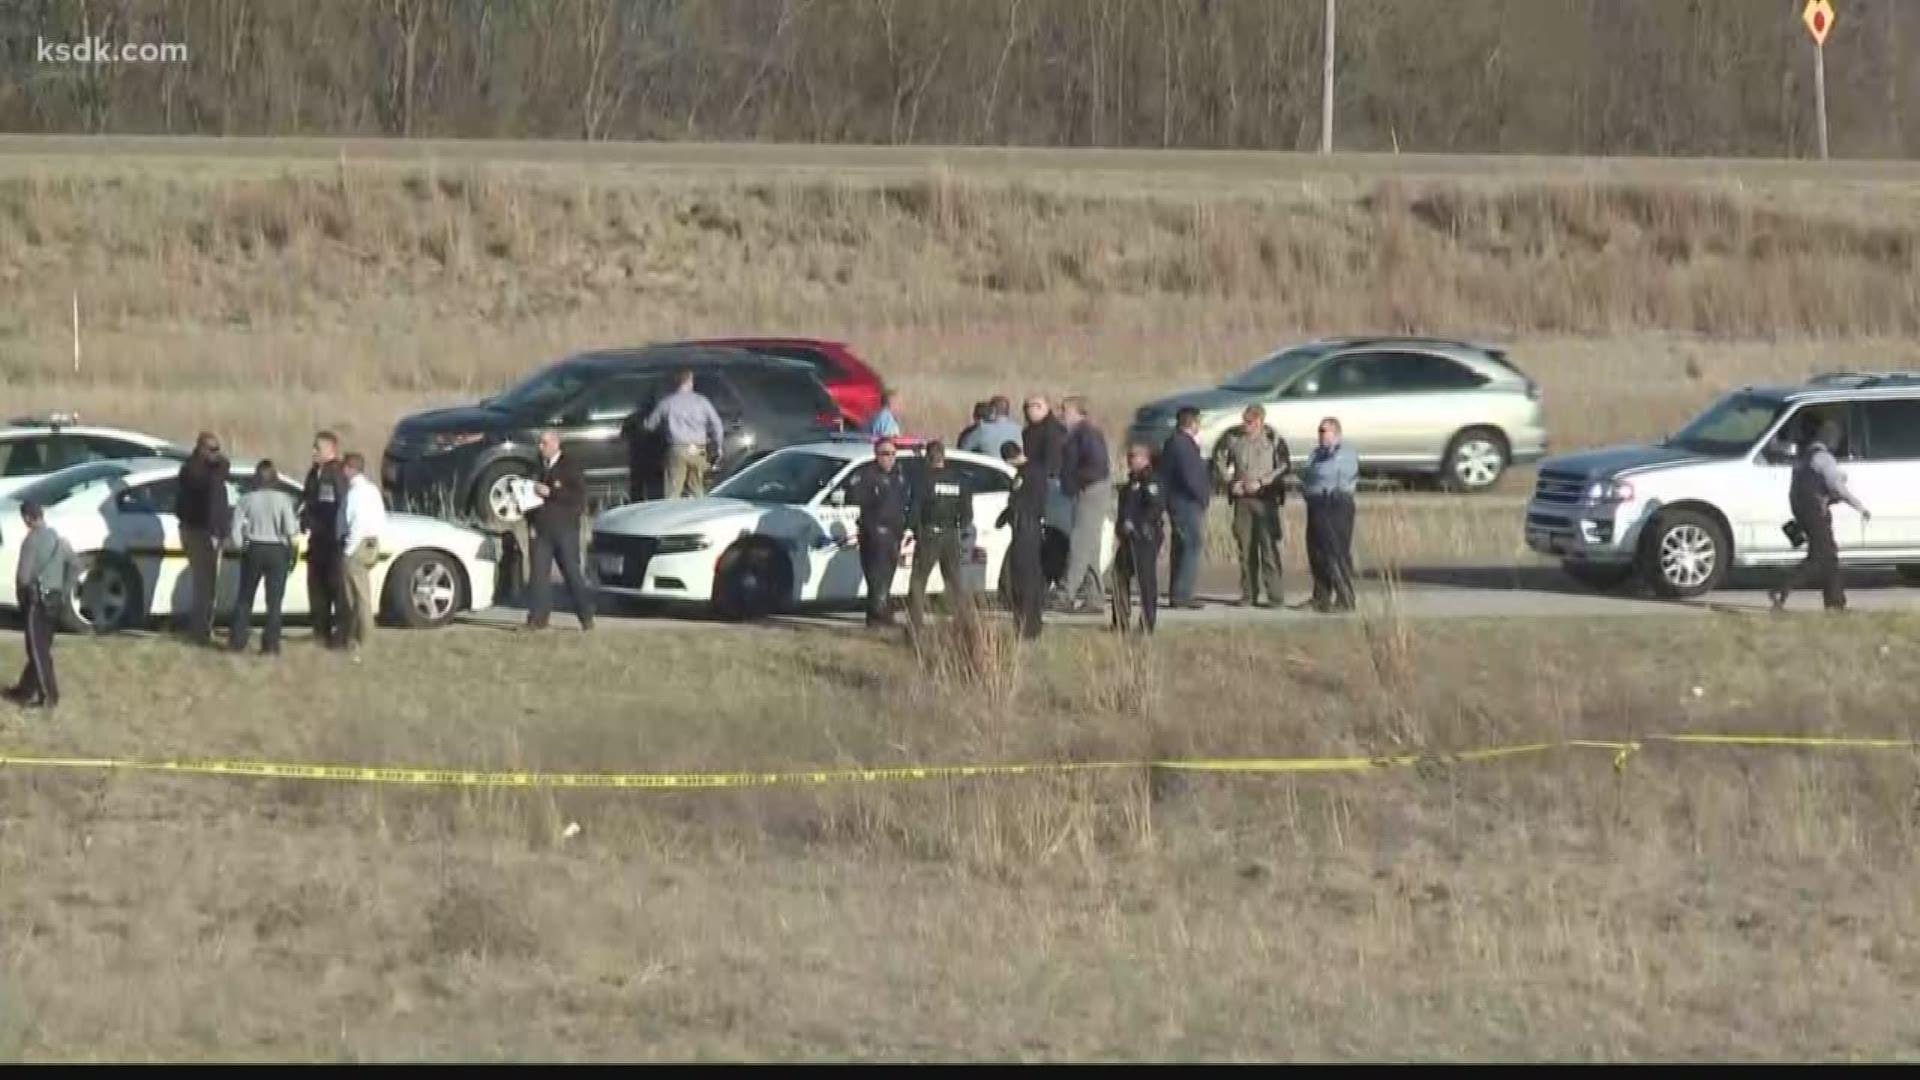 The officer and suspect exchanged gunfire after a police pursuit on Interstate 55.